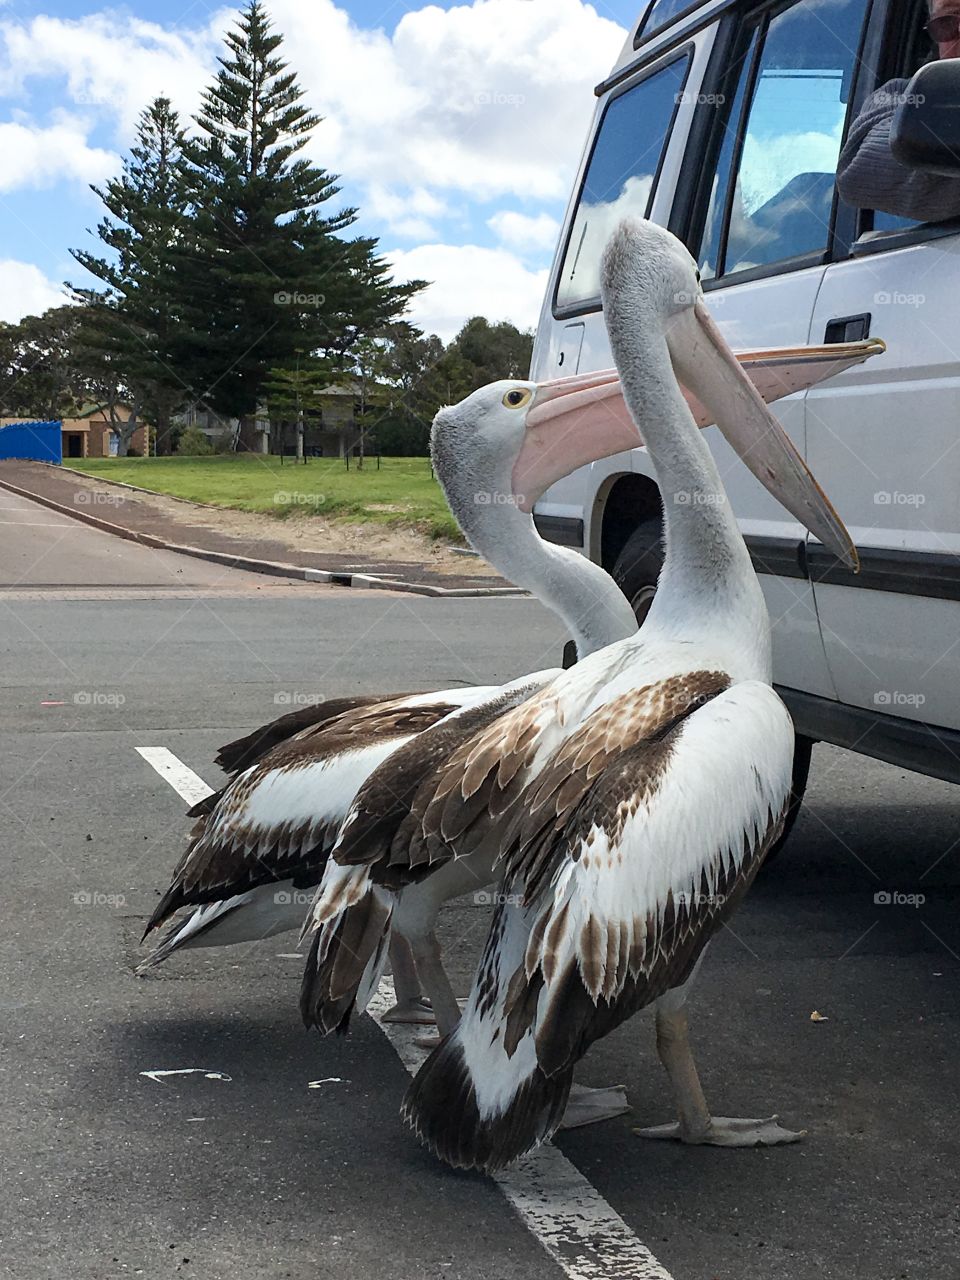 Giant Australian seagulls, just kidding! Two large Pelicans begging for food handouts from people in parked vehicle at beach 